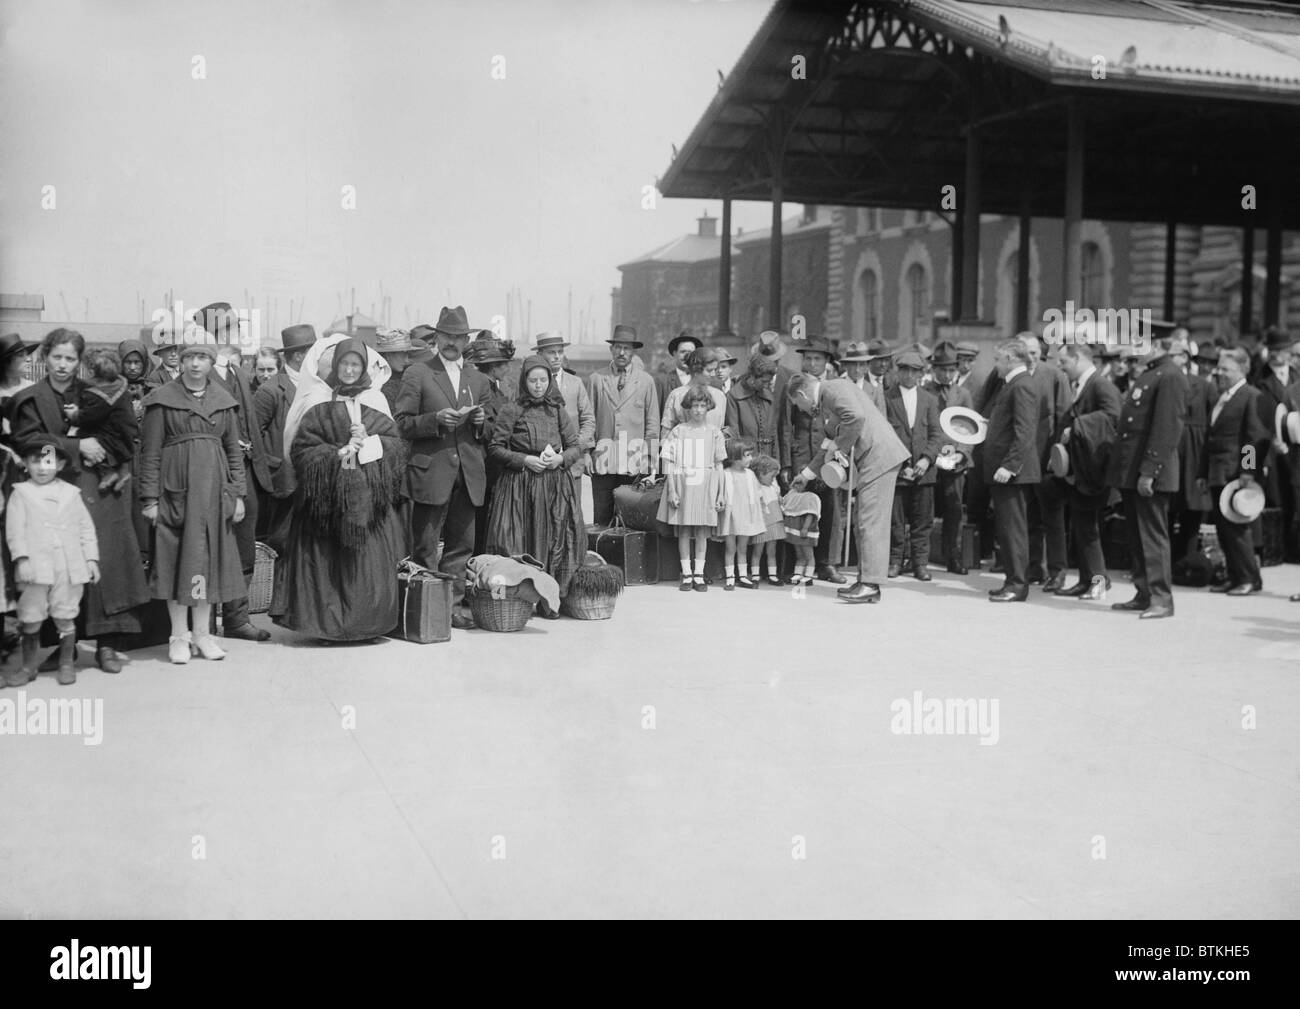 Ellis Island commissioner, Frederick Wallis posed with a group of new arrivals in 1921-21, during the end of unlimited influx of immigrants and transition to restrictions established with the 1924 Immigration Quota Act. Stock Photo